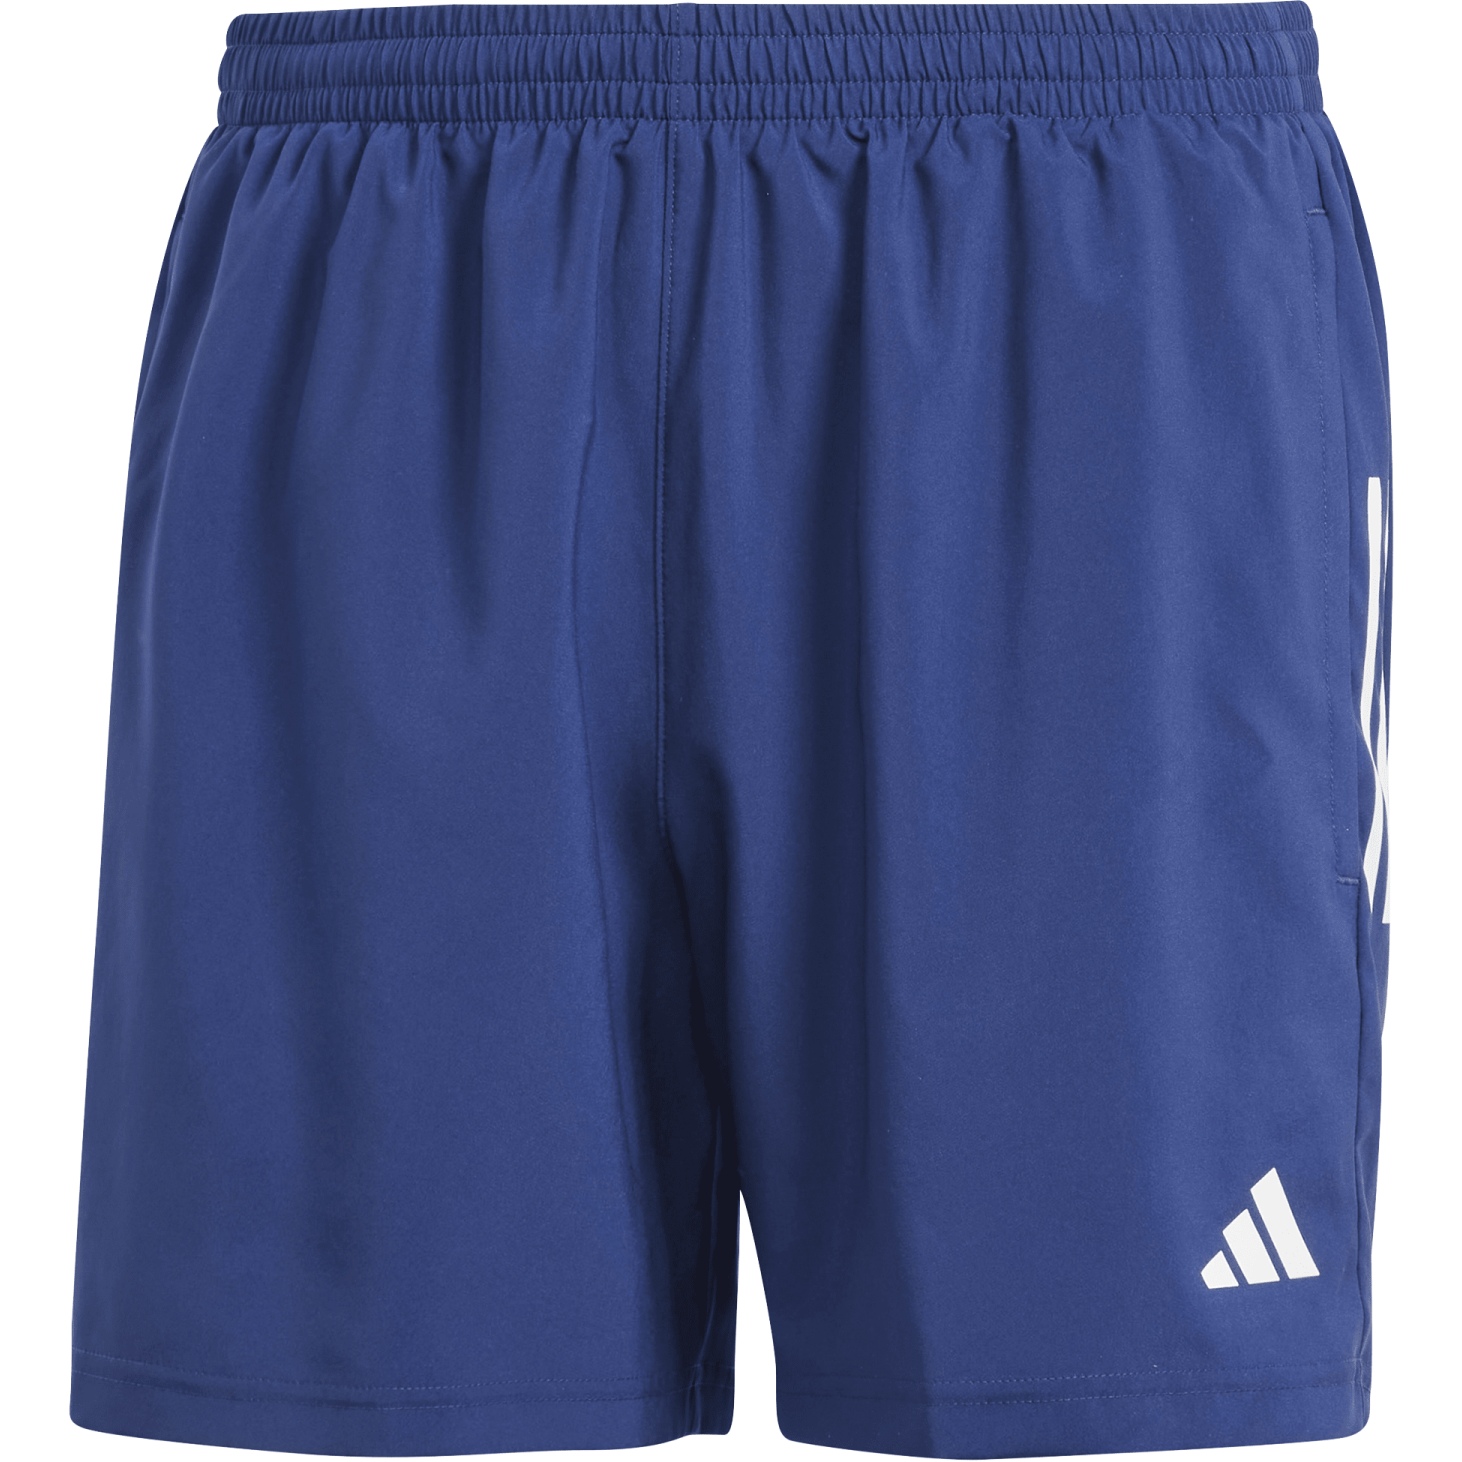 Picture of adidas Own the Run Shorts Men - dark blue IY0706